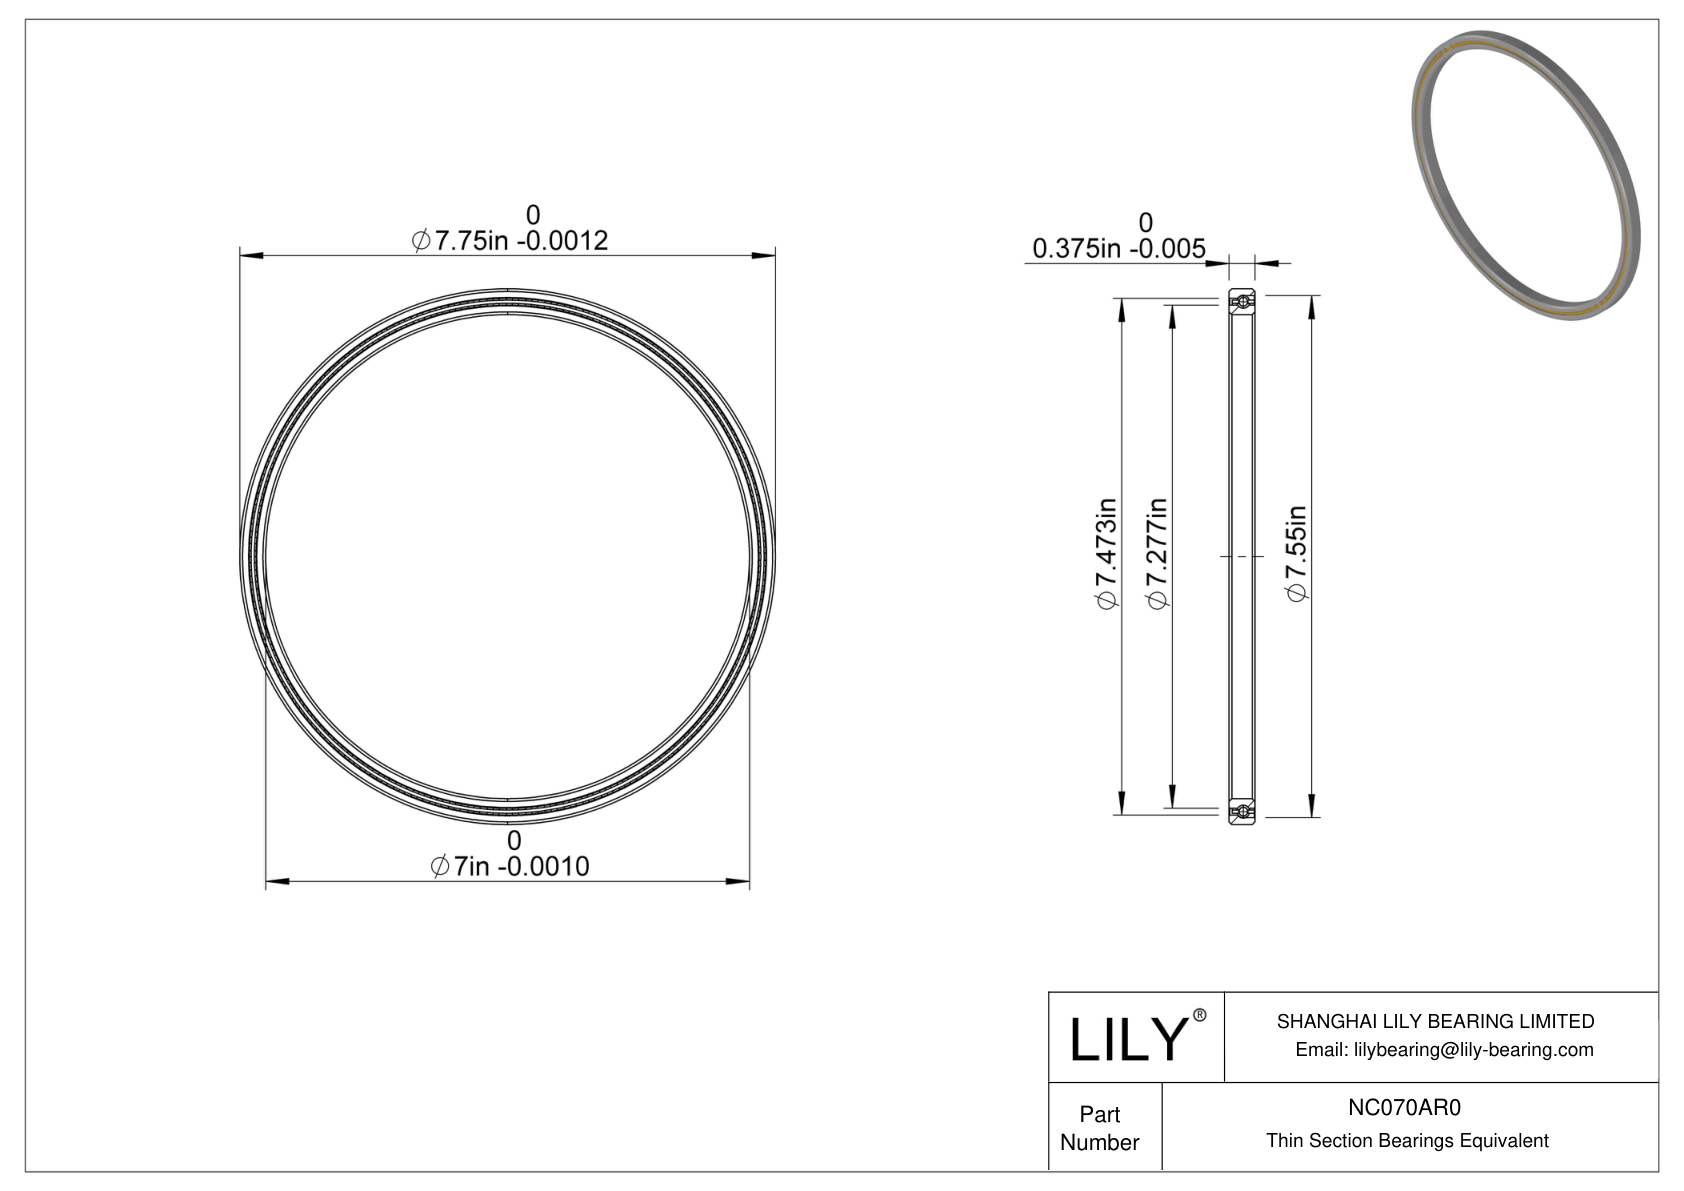 NC070AR0 Constant Section (CS) Bearings cad drawing